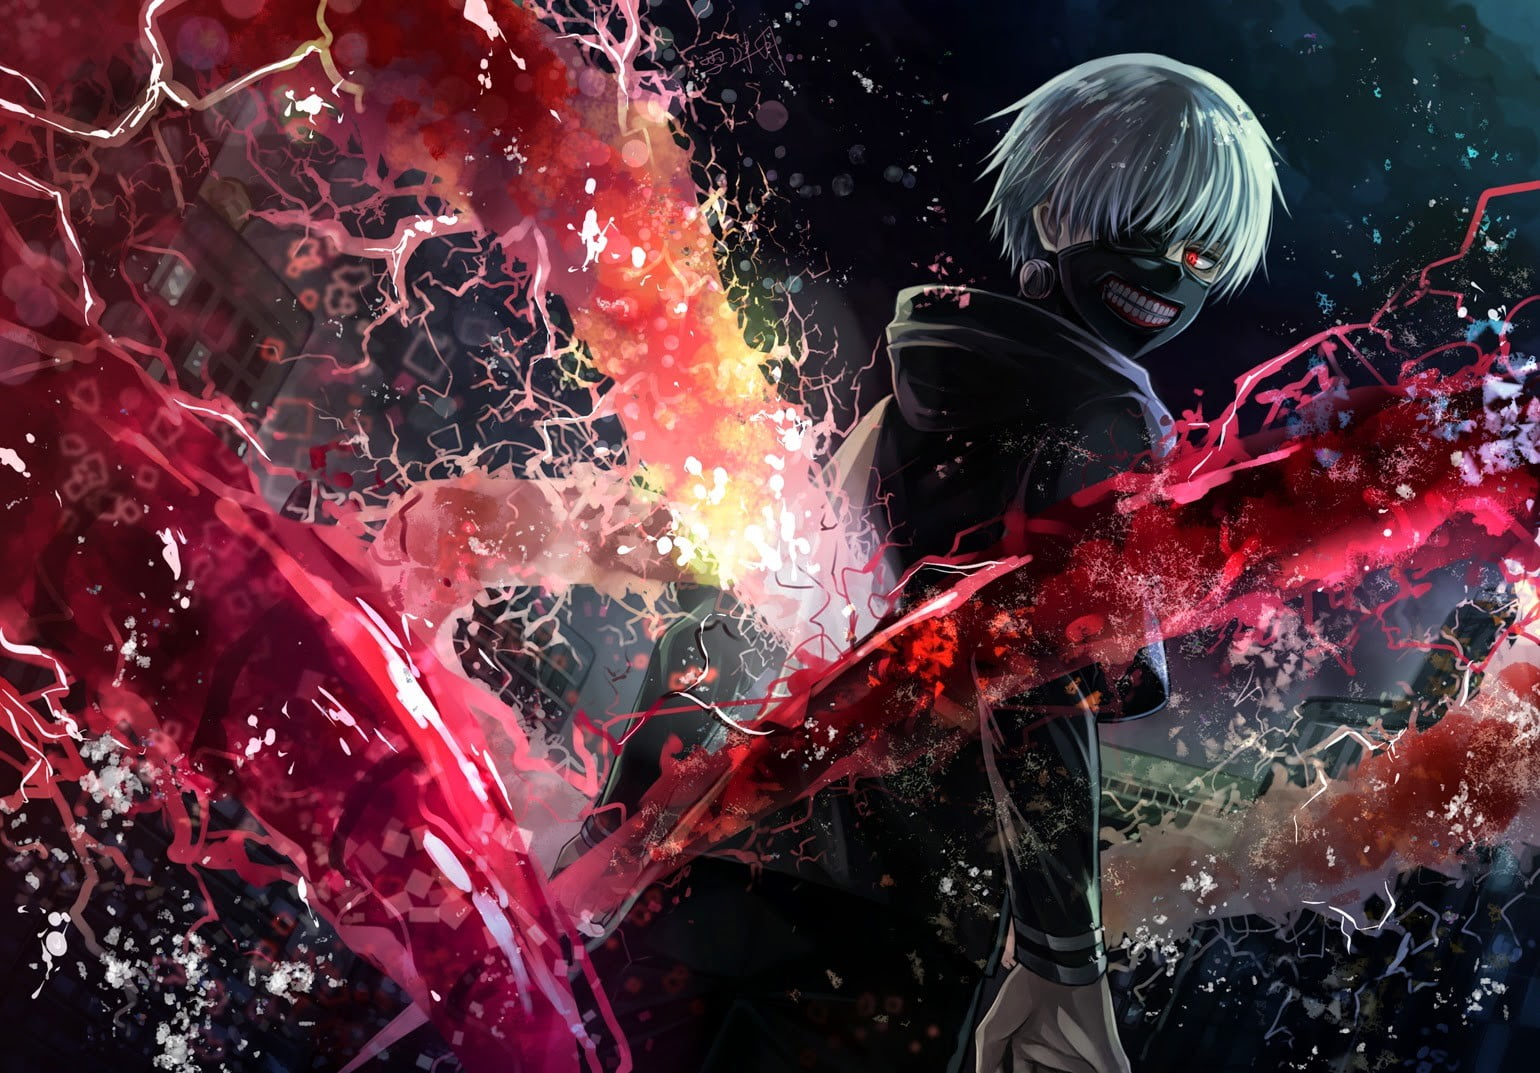 digital art of boy, Tokyo Ghoul, one person, real people, red